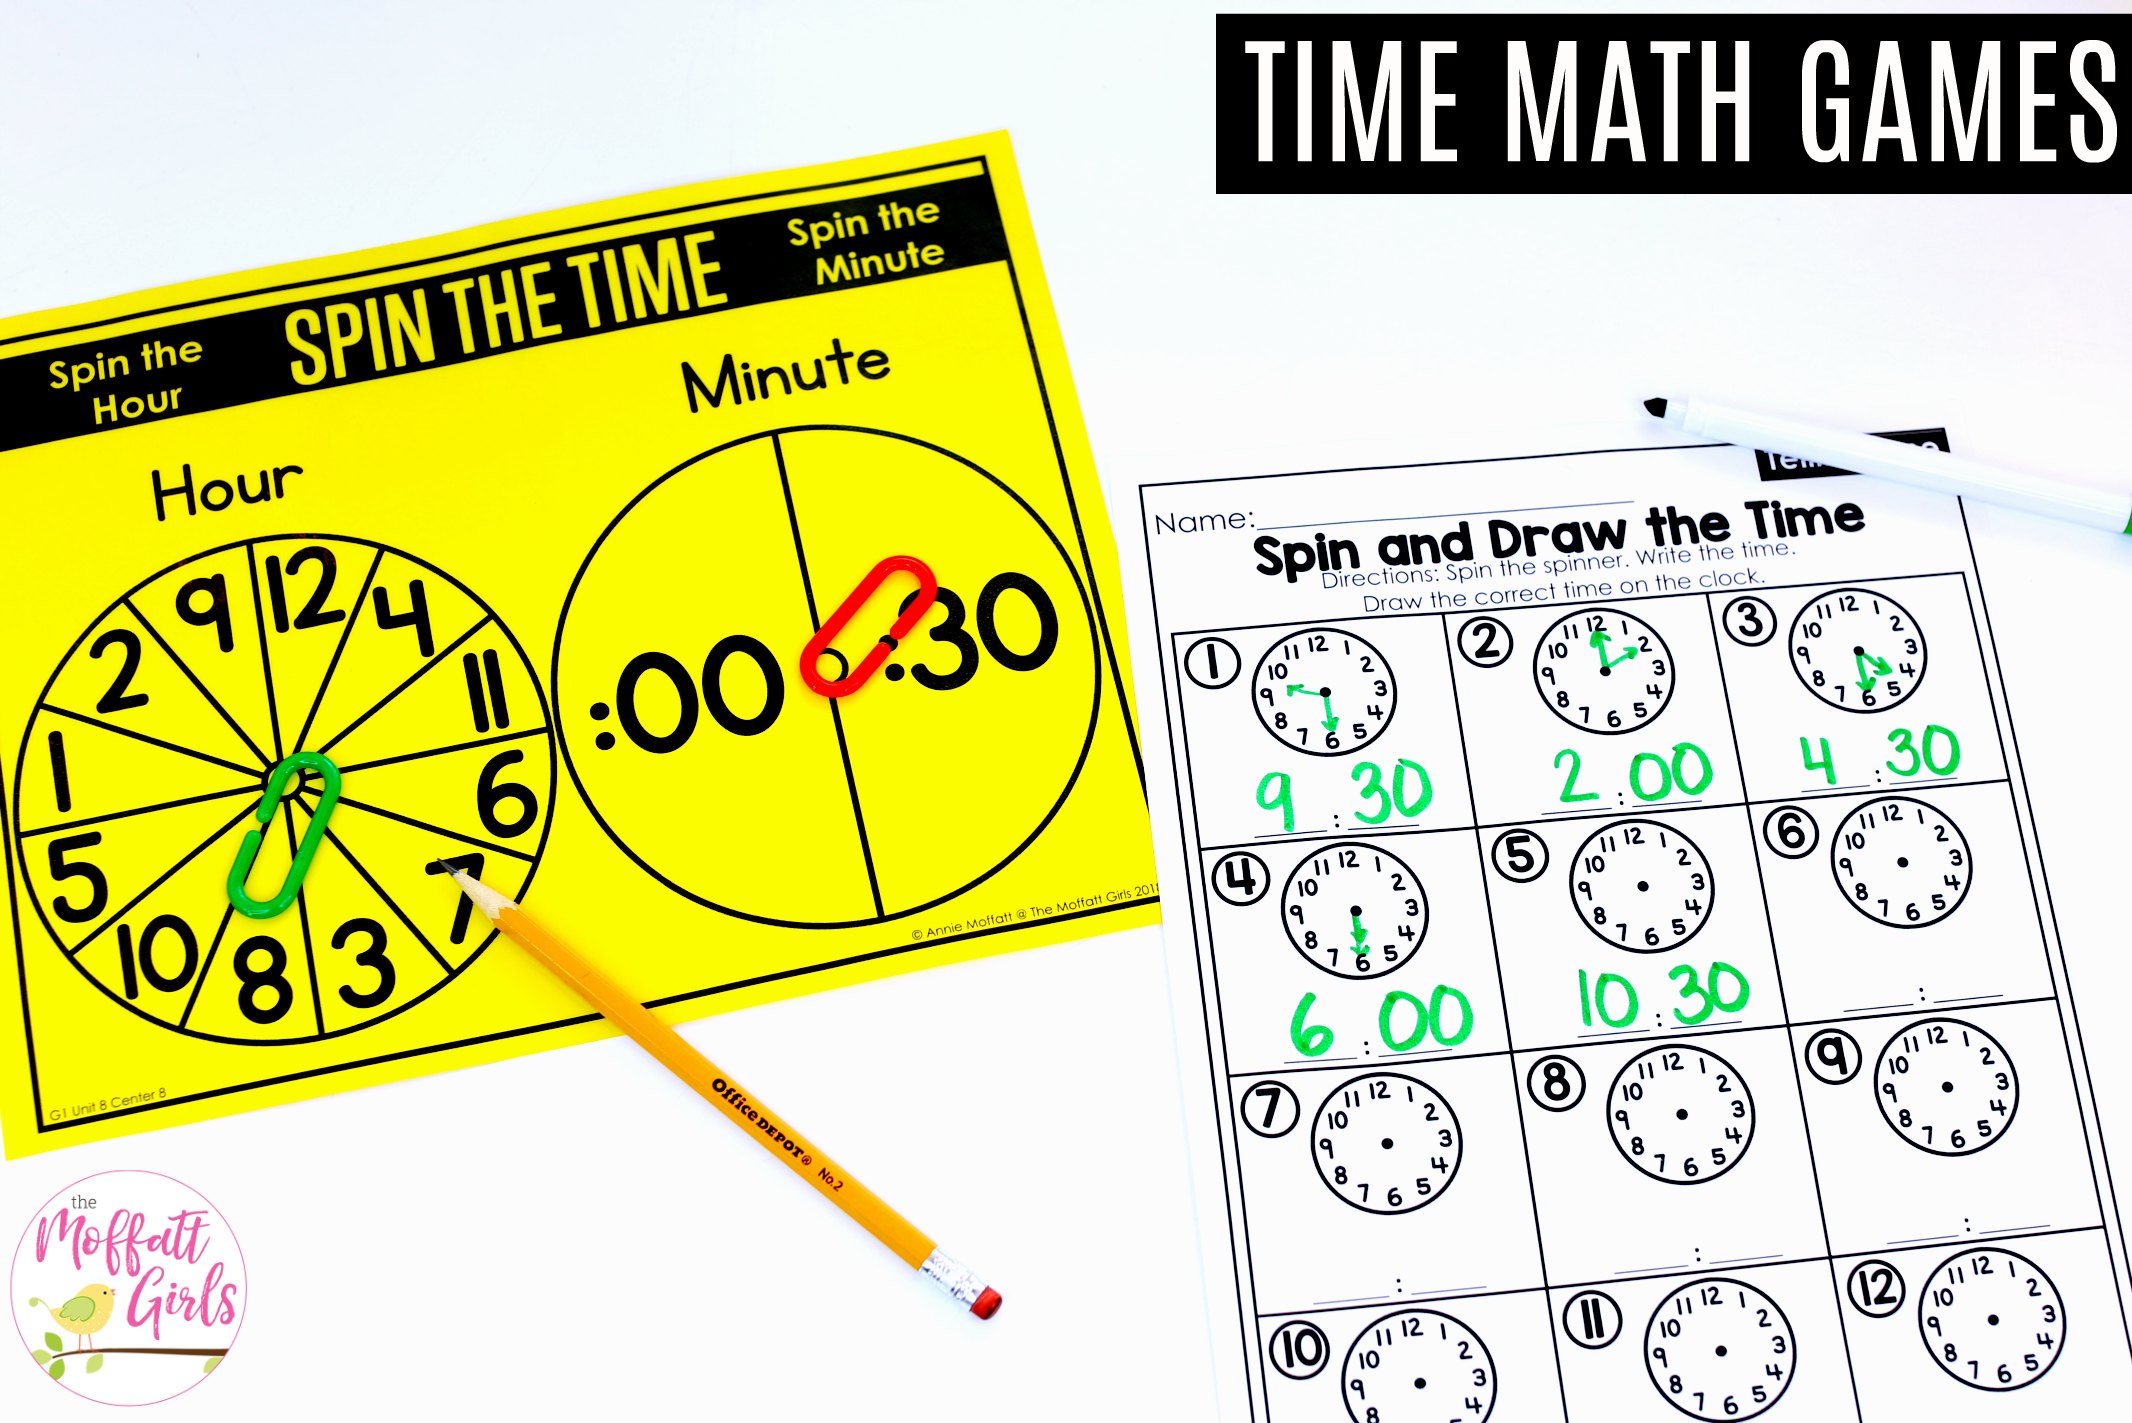 Spin names. Math games. Math time. Telling the time. Math Floyd игра.